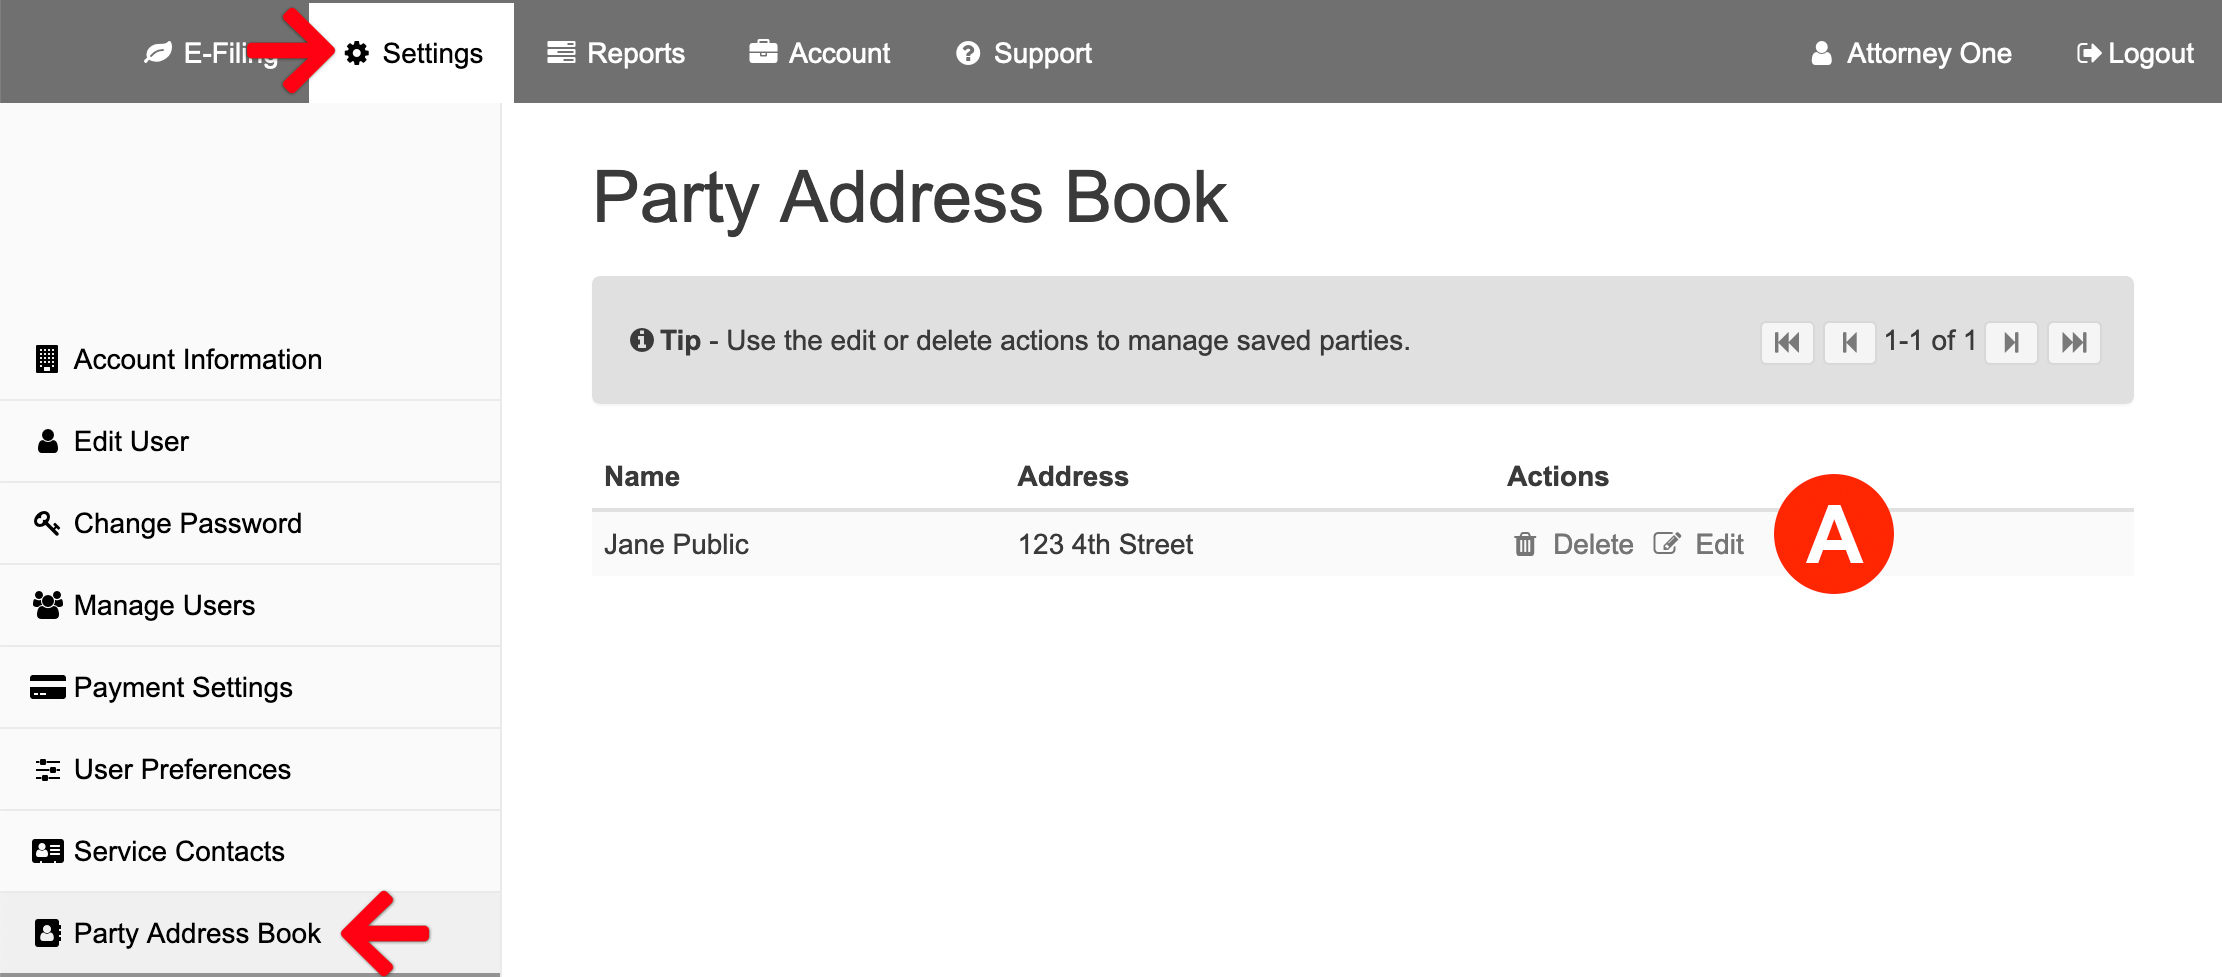 Party Address Book